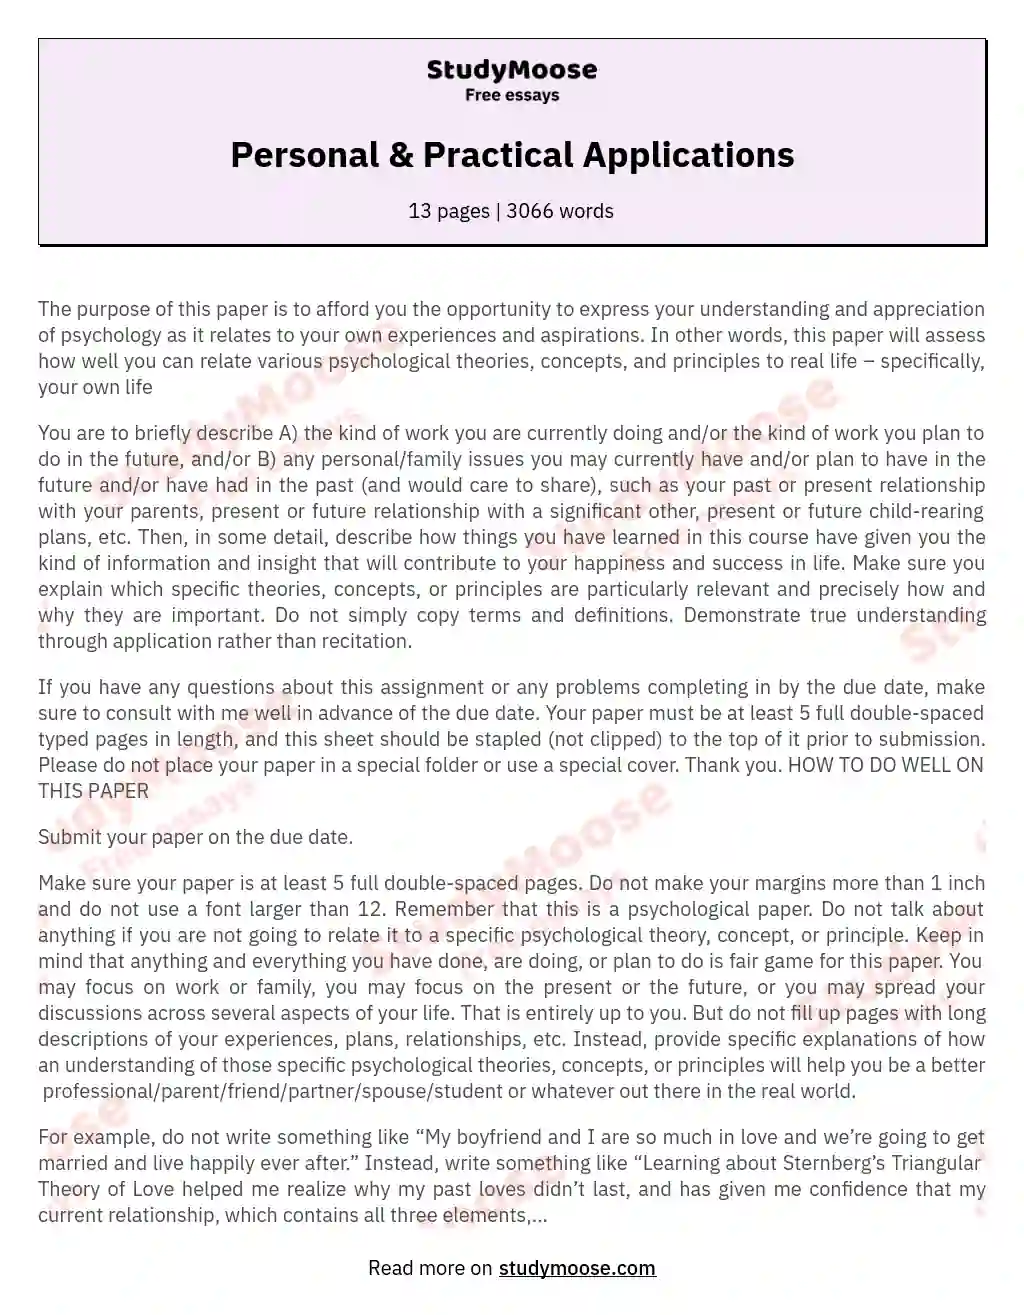 Personal & Practical Applications essay